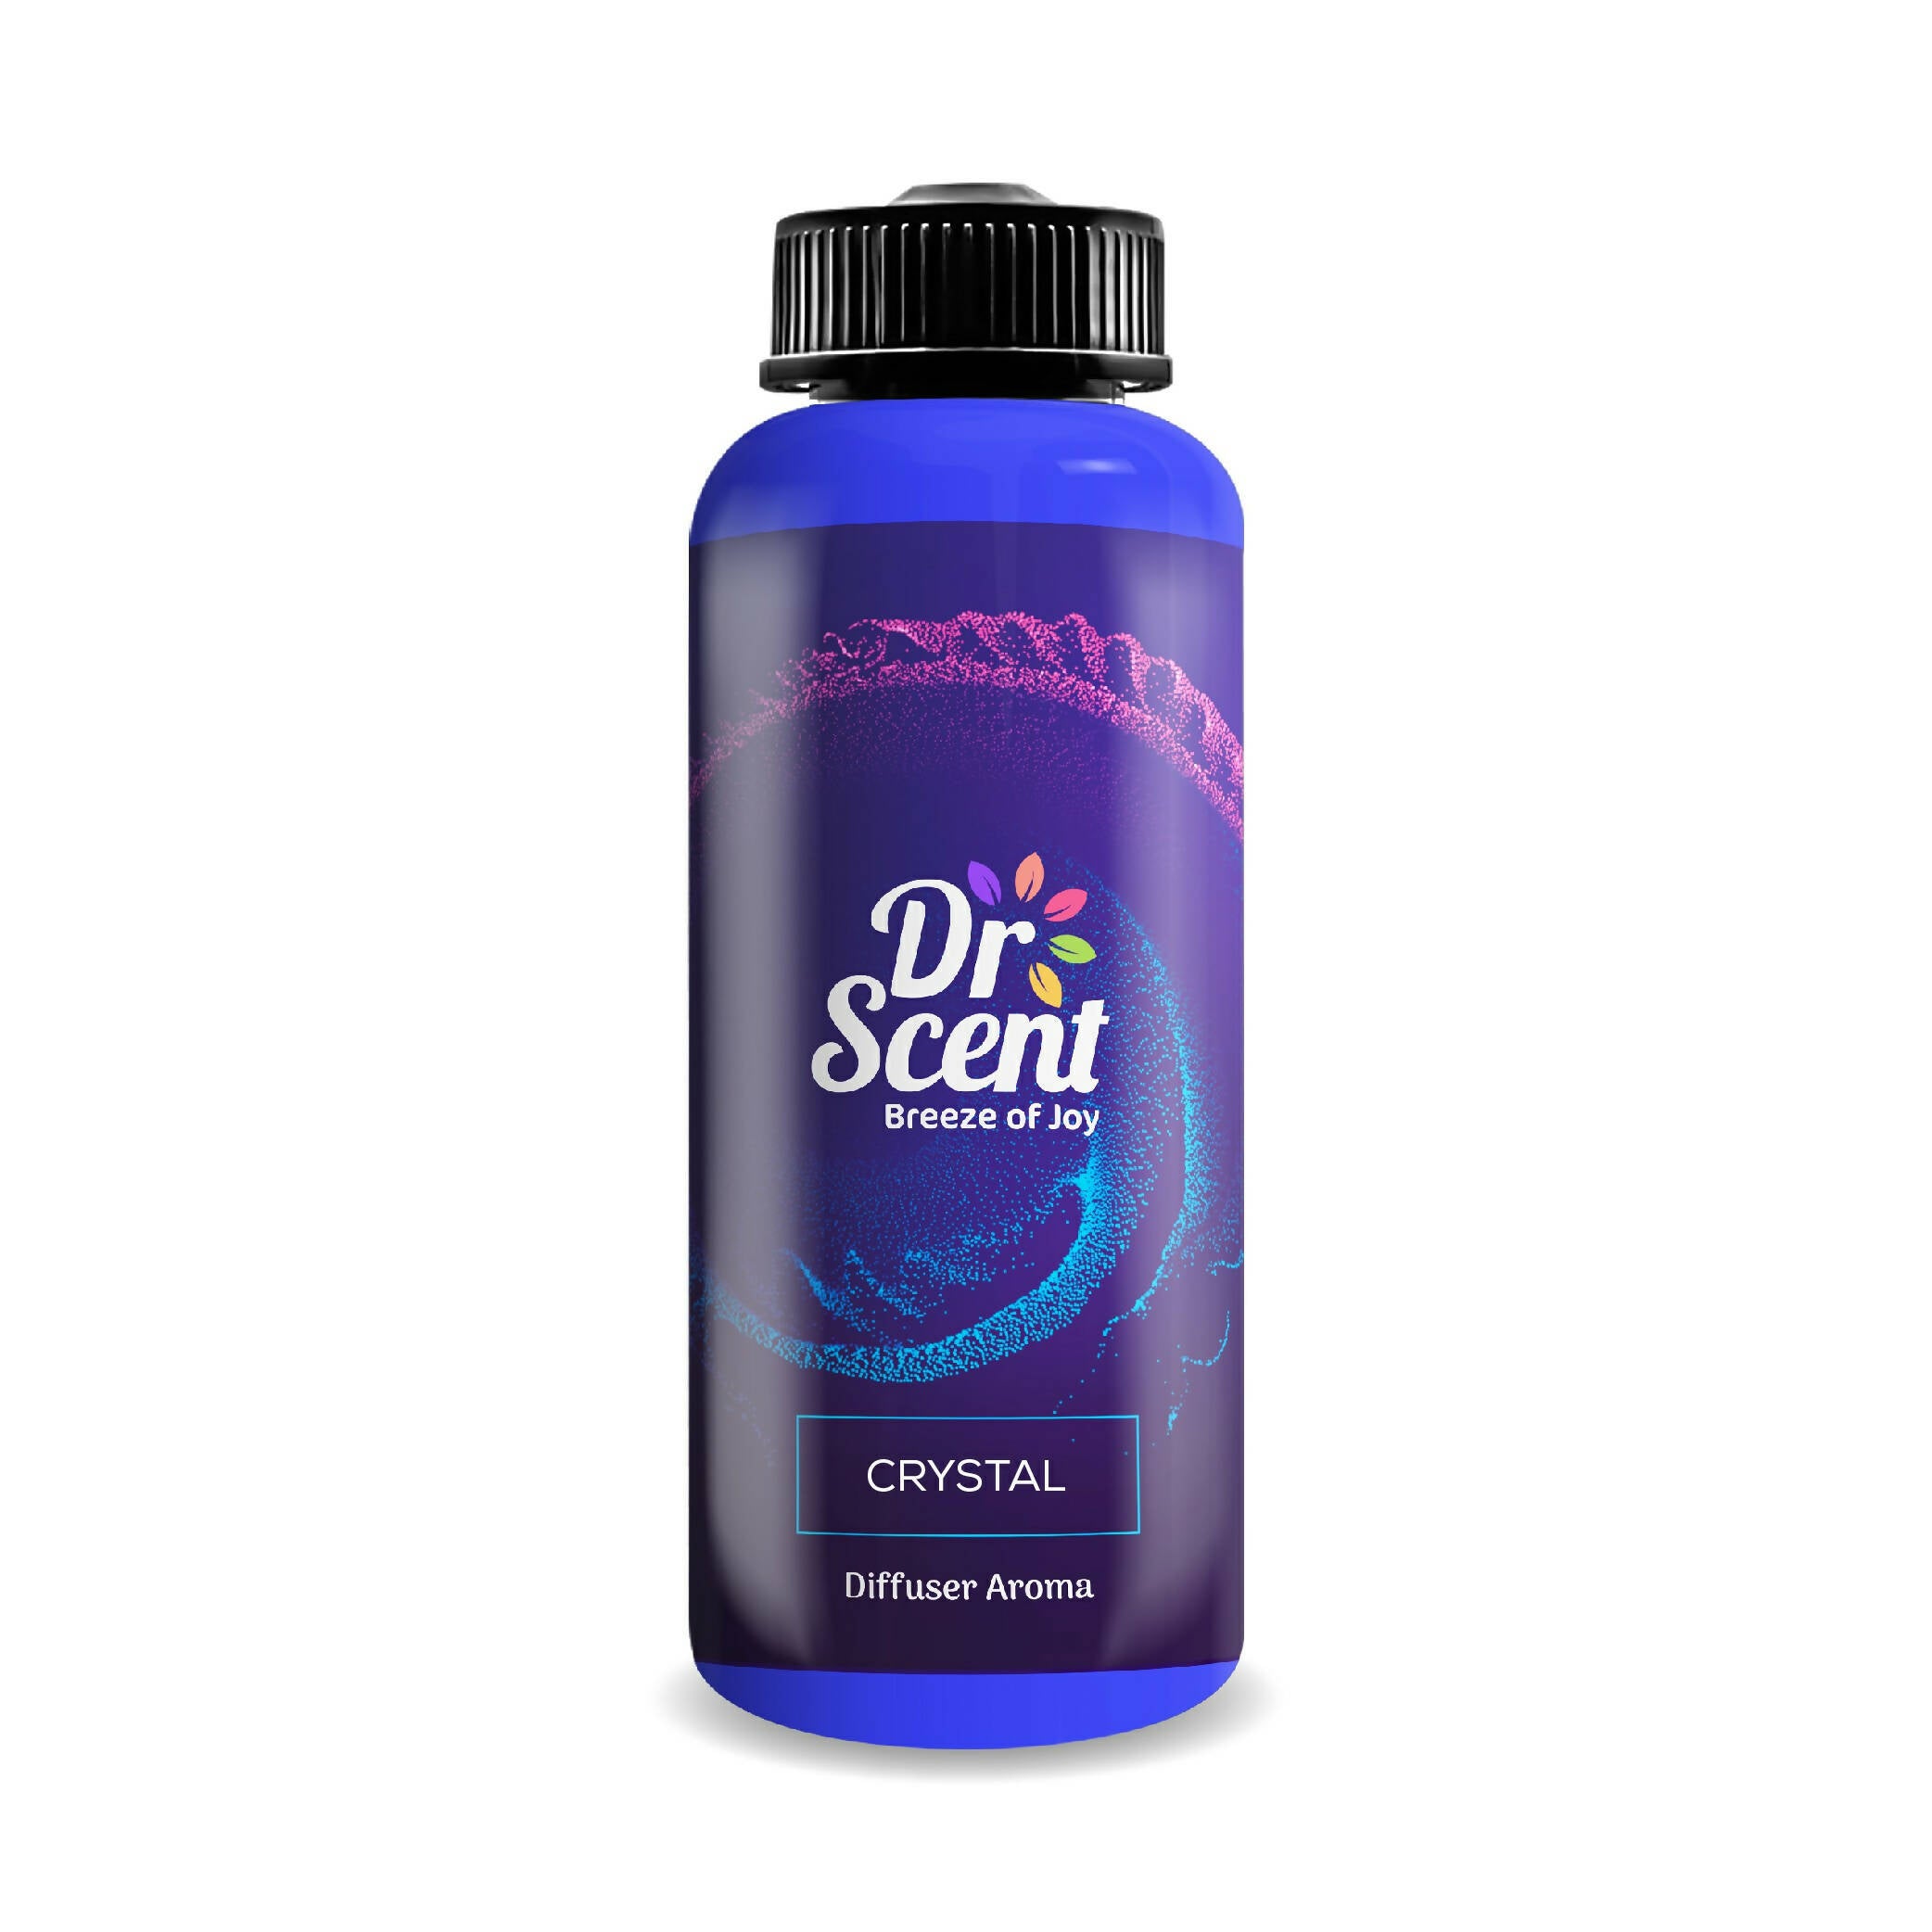 Dr Scent Crystal